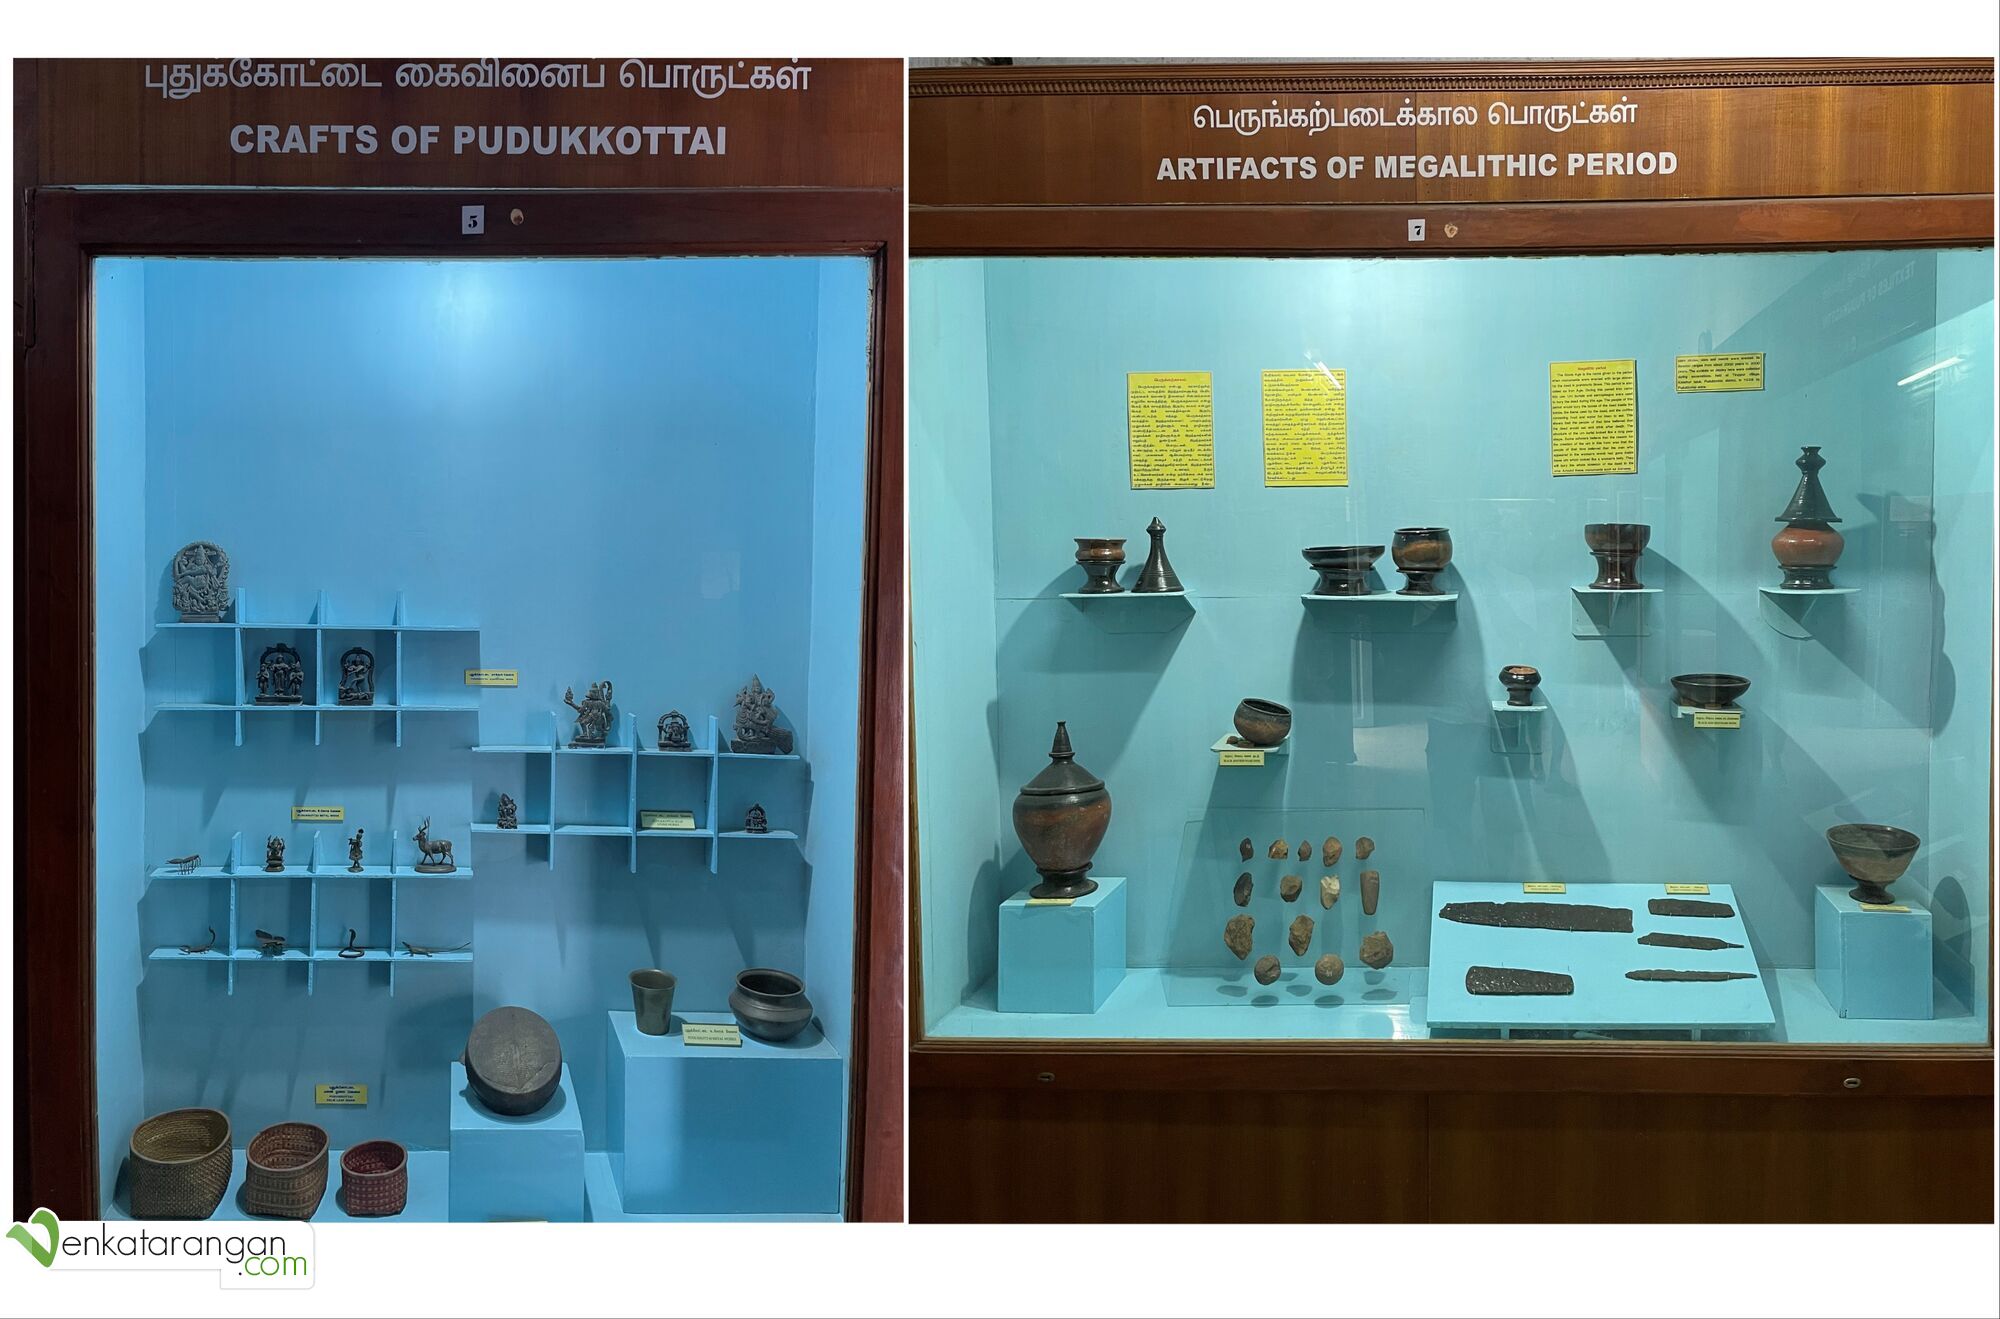 Crafts of Pudukkotai and Artifacts of Megalithic Period